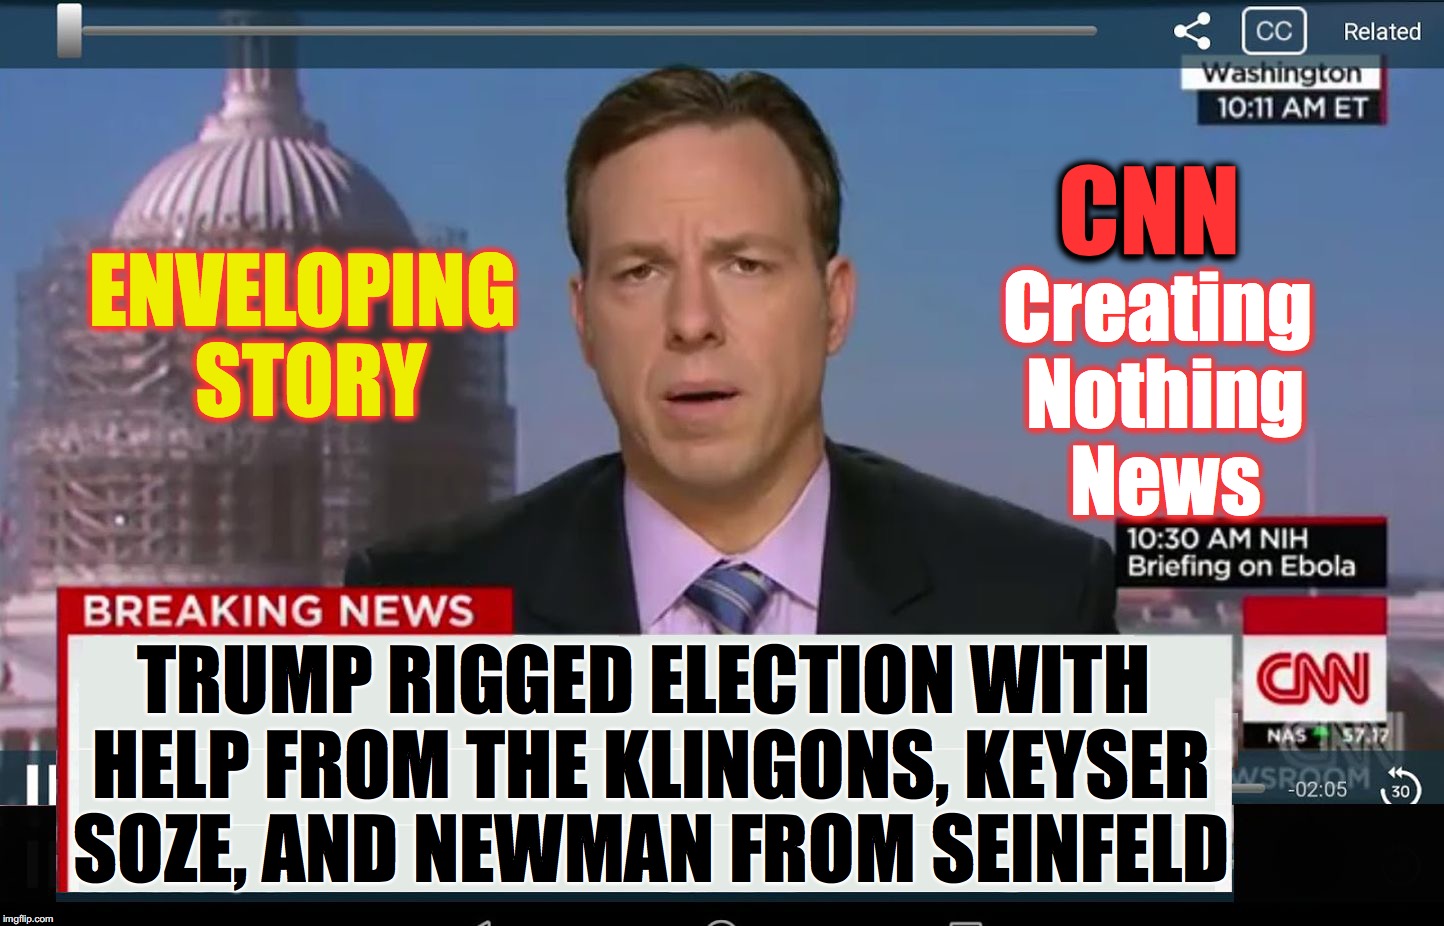 CNN Crazy News Network | CNN; Creating Nothing News; ENVELOPING STORY; TRUMP RIGGED ELECTION WITH HELP FROM THE KLINGONS, KEYSER SOZE, AND NEWMAN FROM SEINFELD | image tagged in cnn crazy news network | made w/ Imgflip meme maker